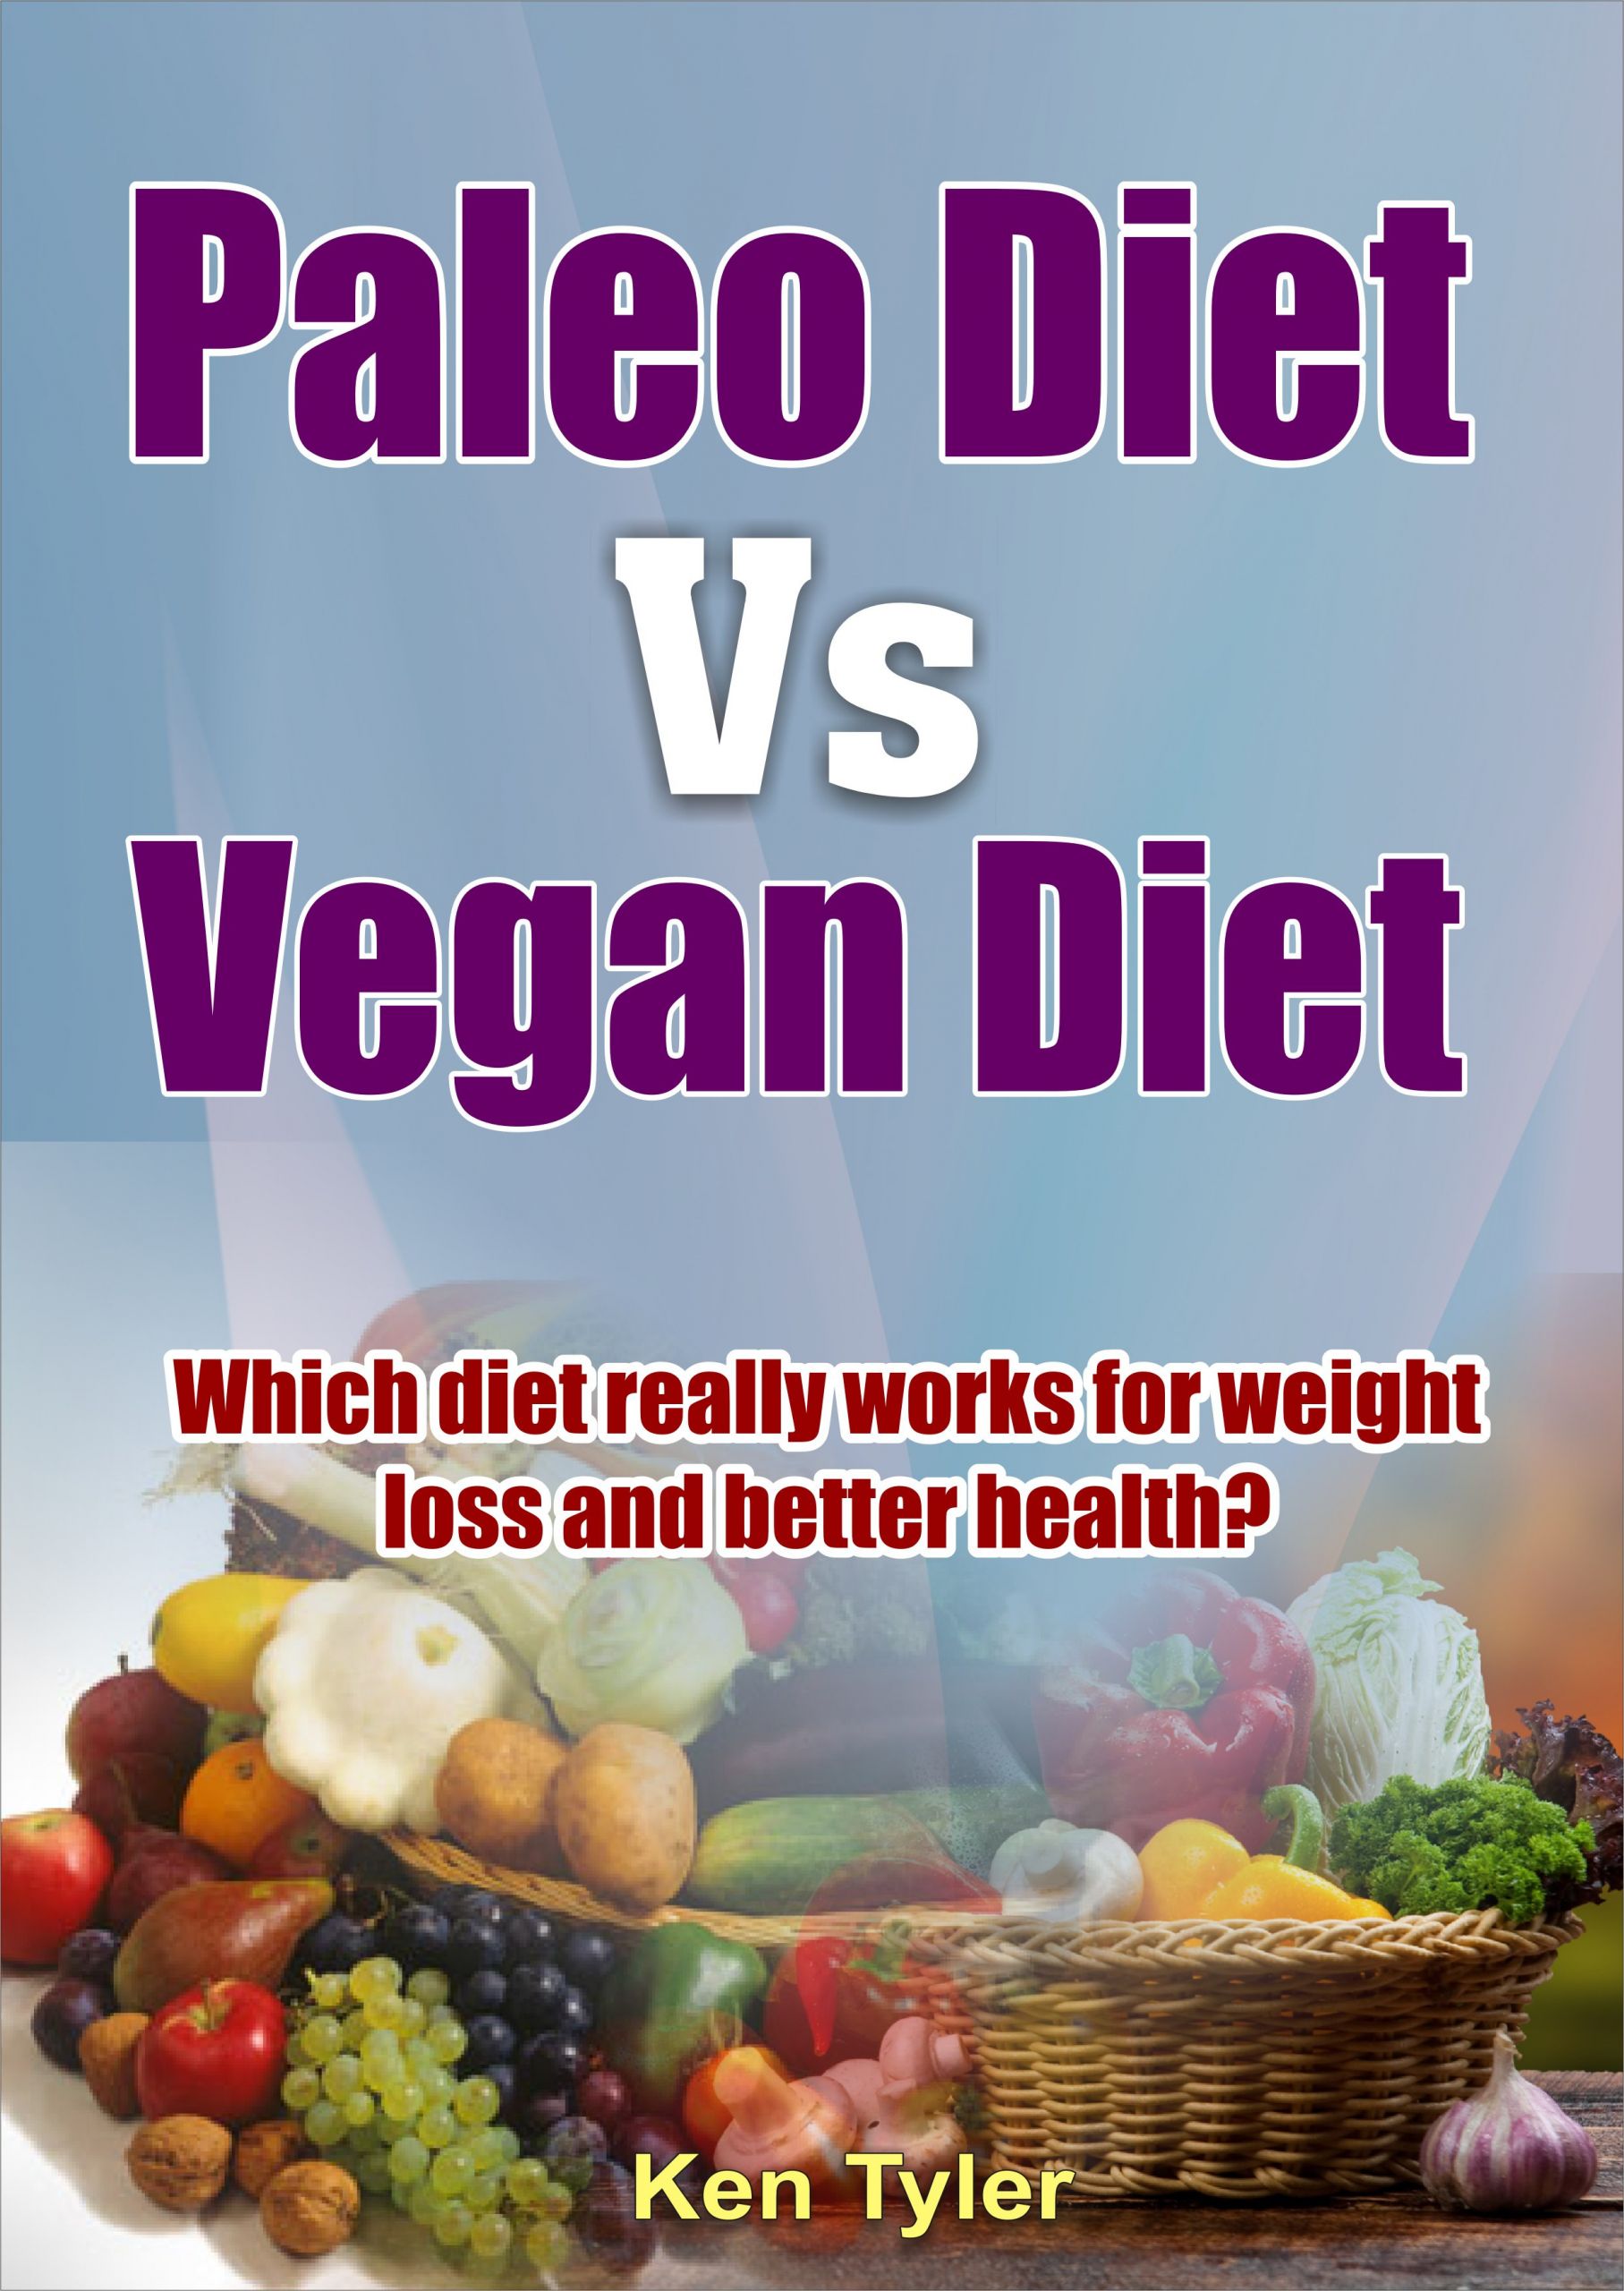 Paleo Diet Vs Vegan
 Paleo Diet vs Vegan Diet Two Diets That Could Save Lives